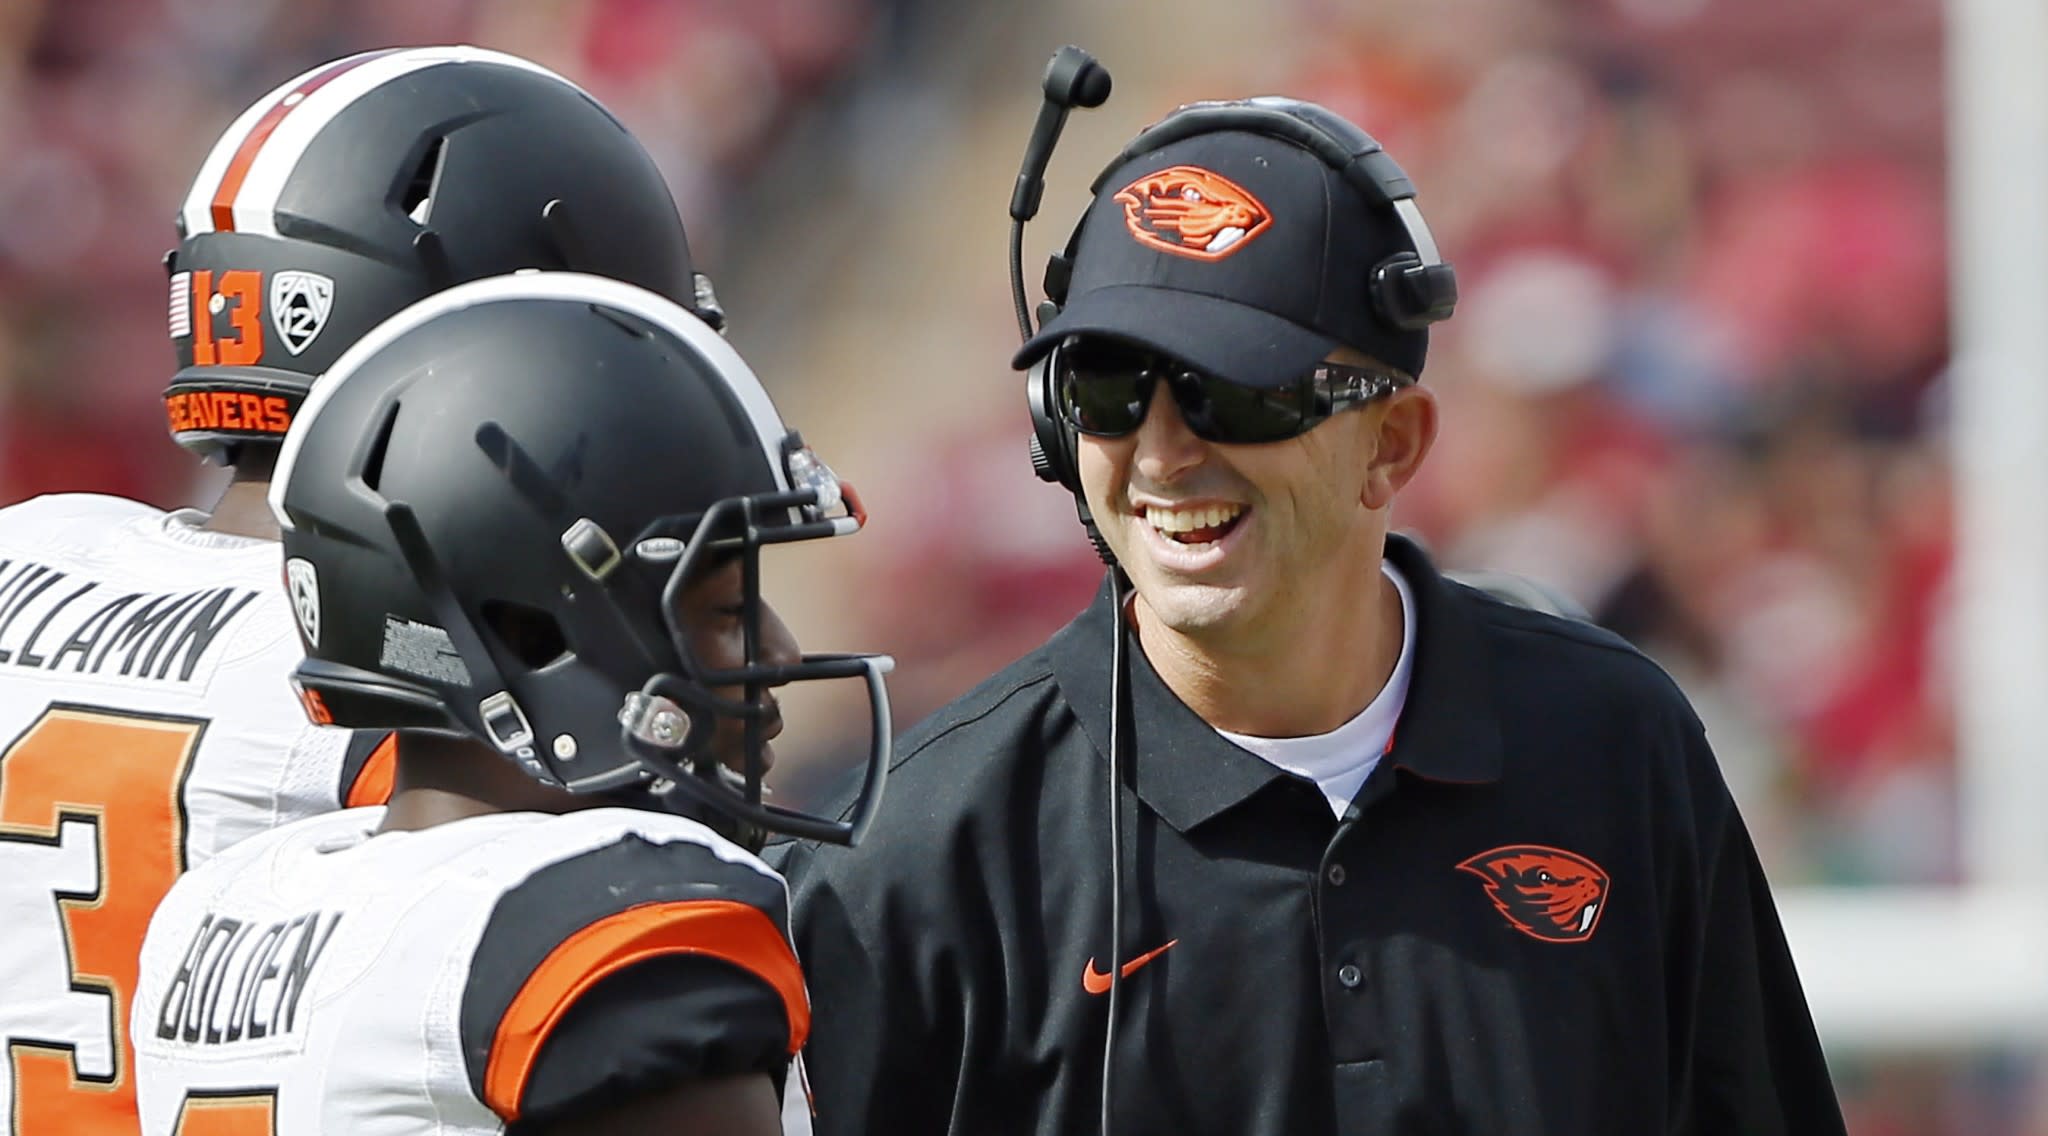 San Jose State hires Oregon State assistant Brent Brennan - Yahoo Sports